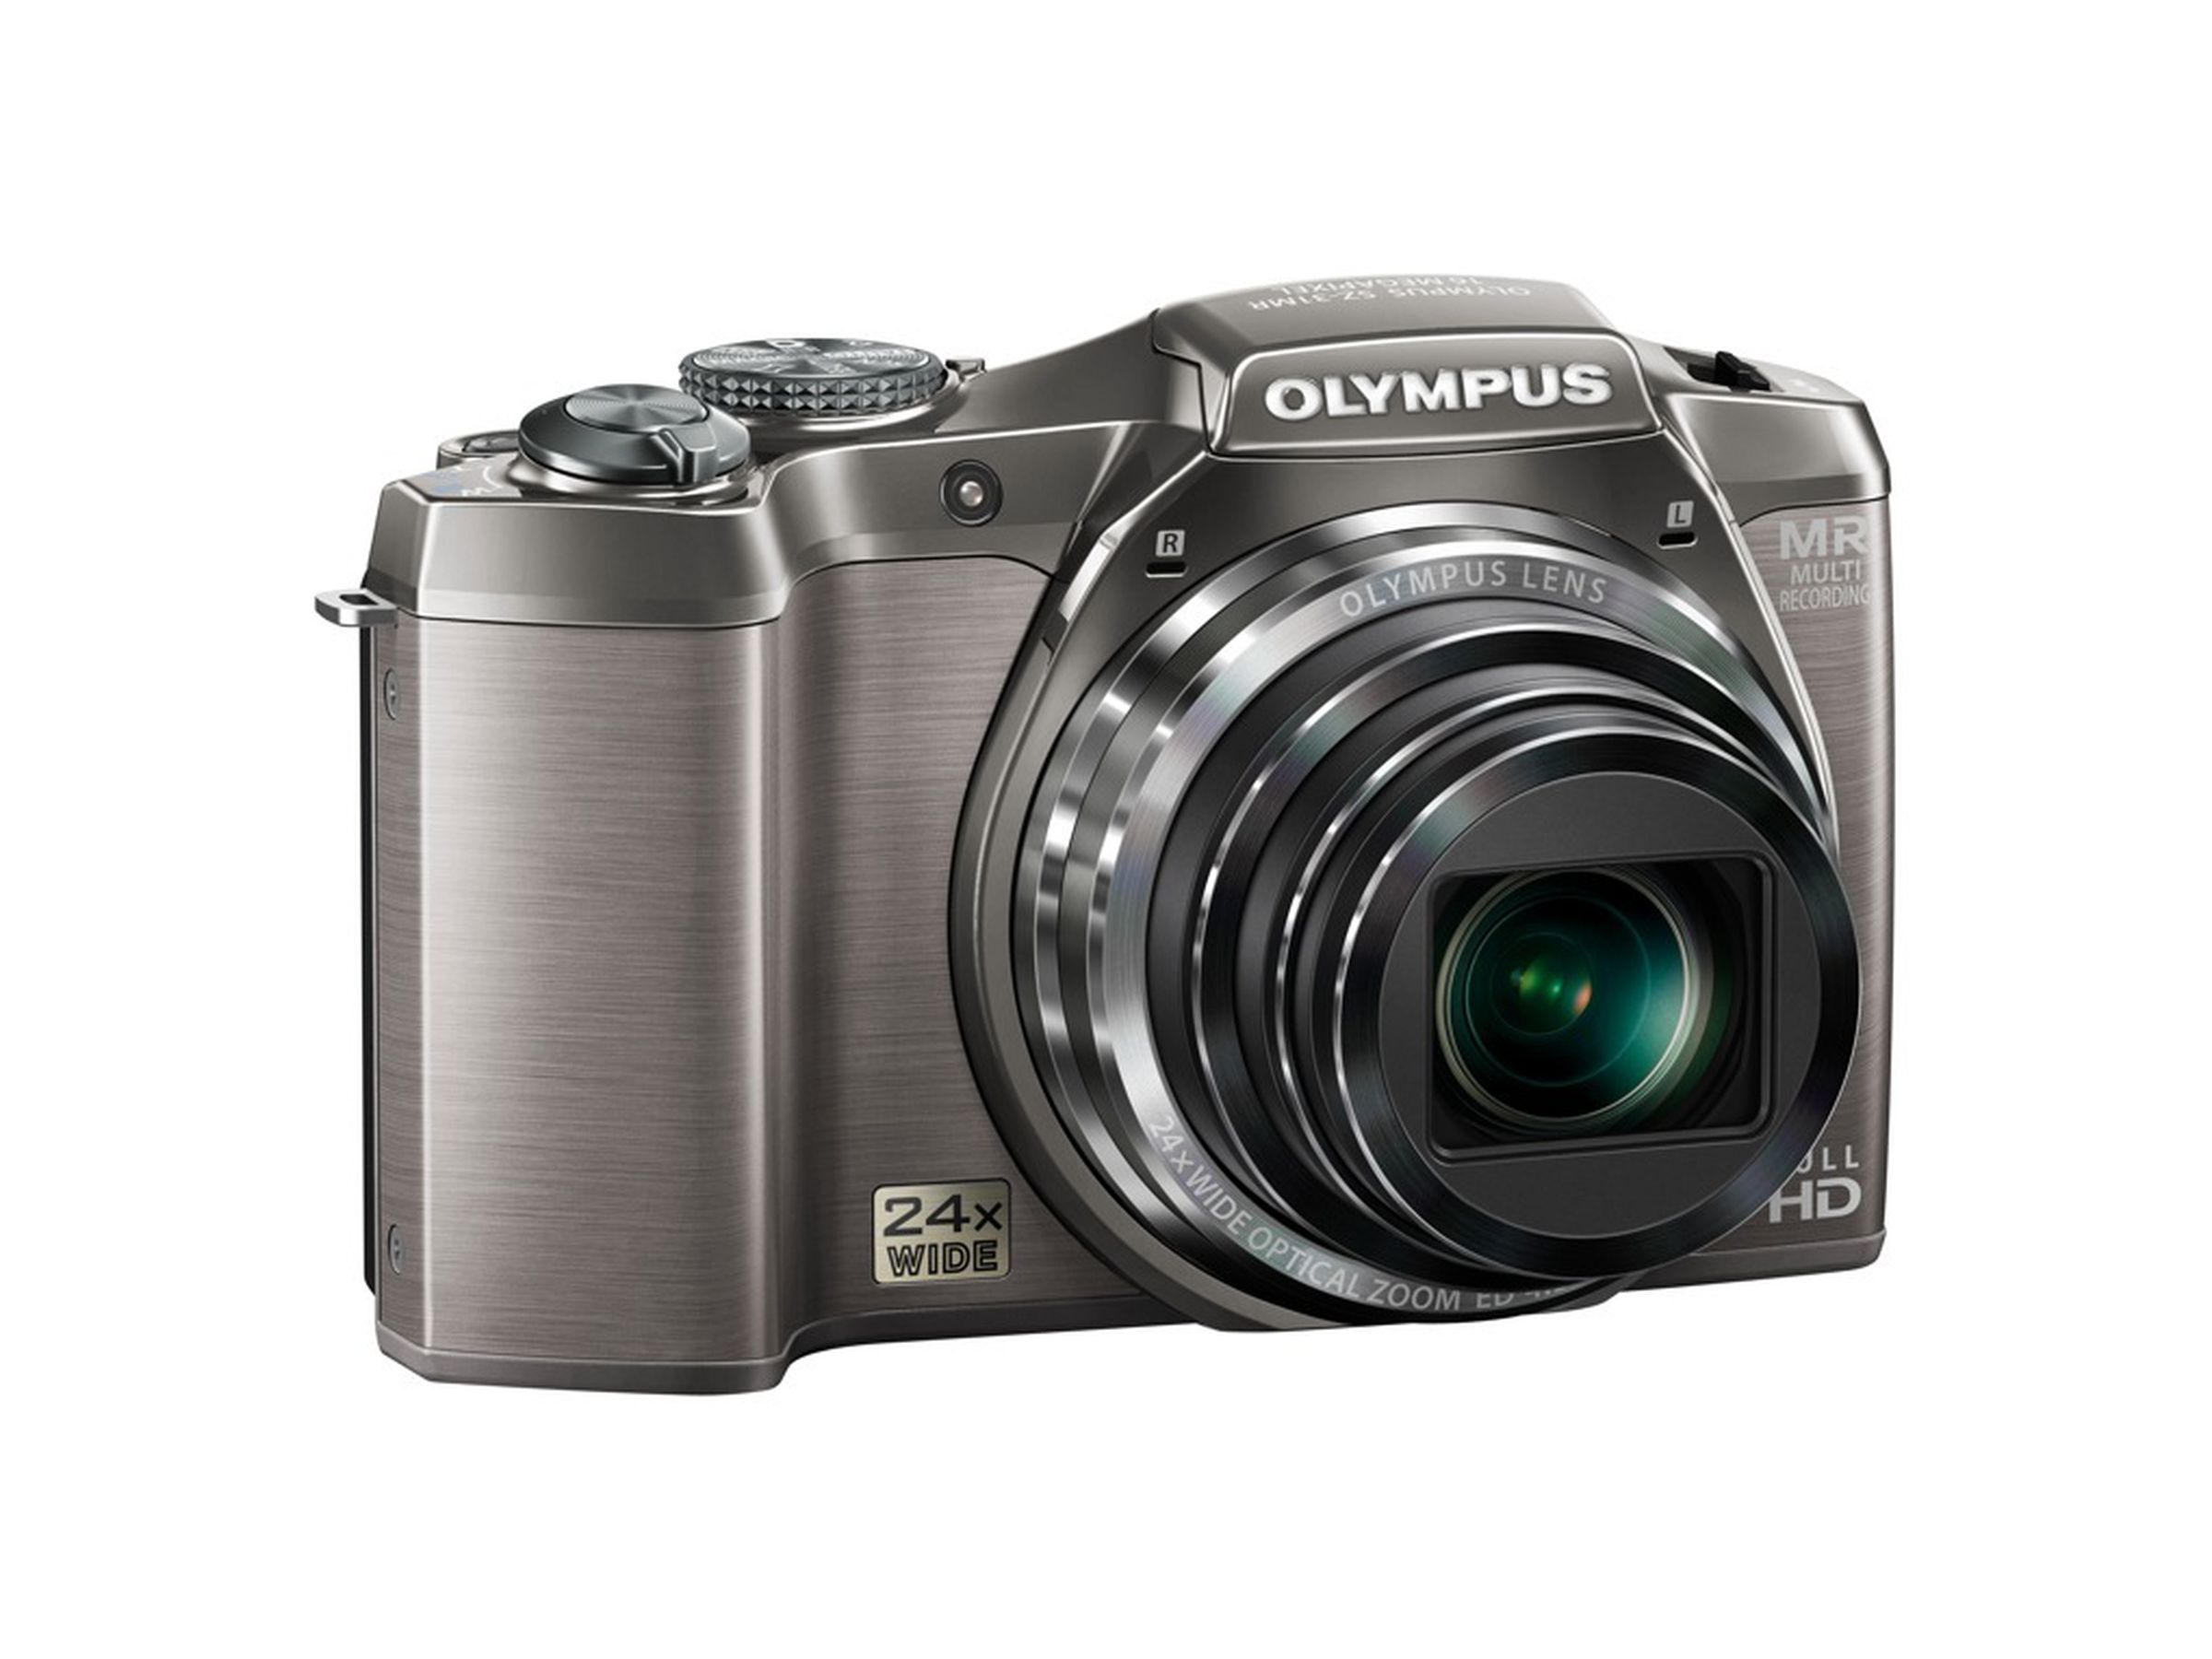 Olympus TG-820 and SZ-31MR pictures